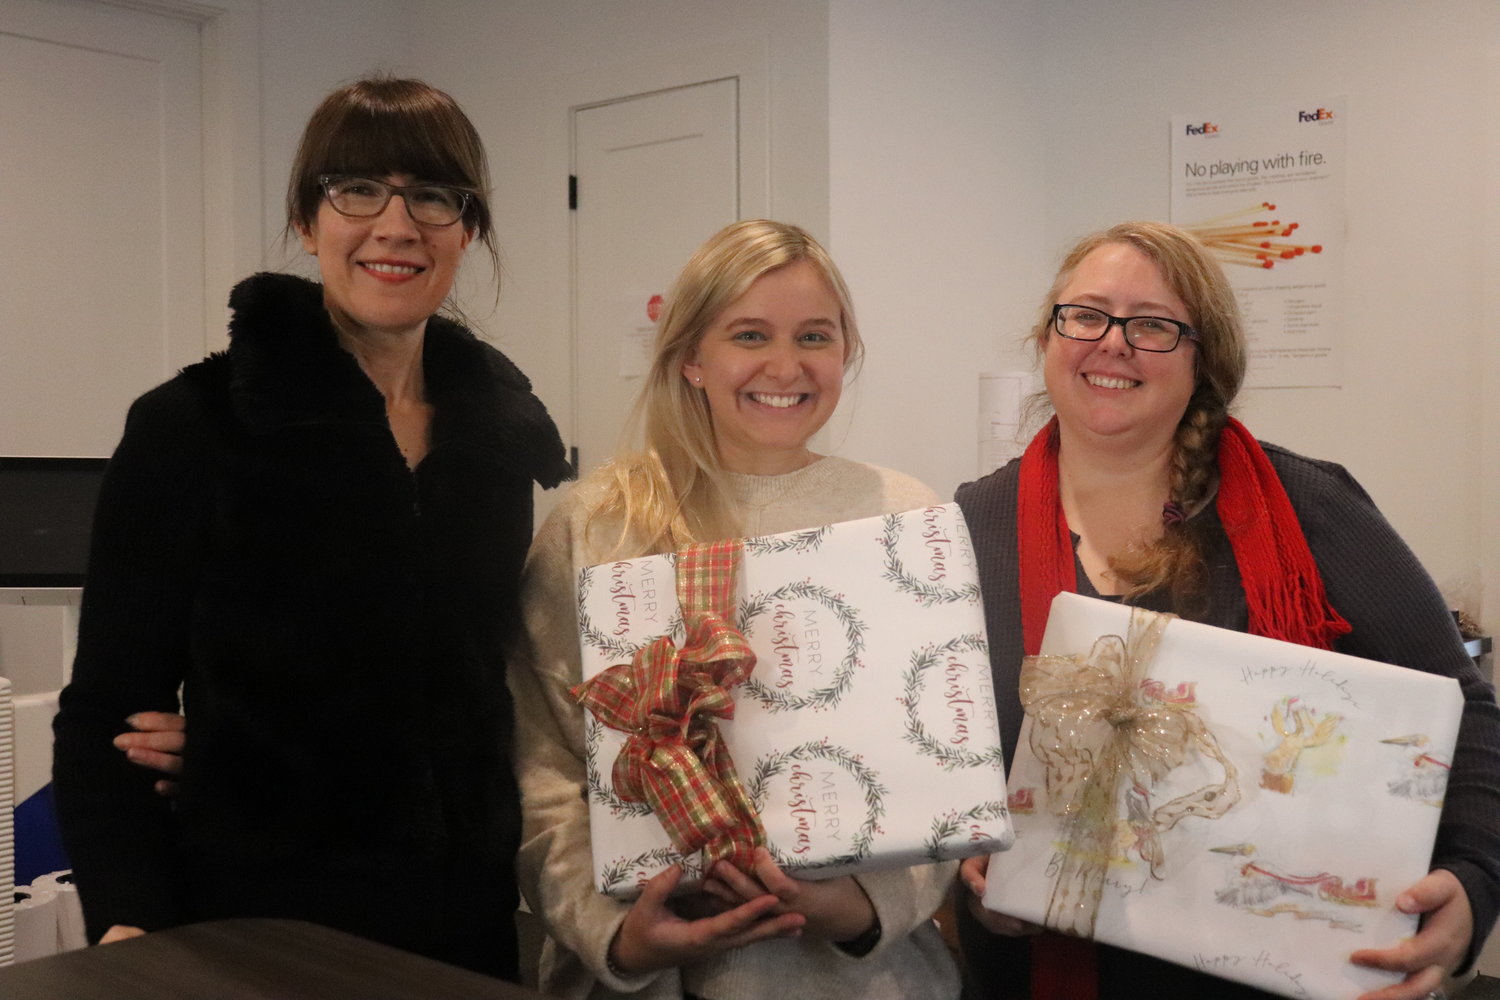 Julie Comer, Grace Horne and Jamie Hadden craft custom gift wrapping for artists and families.